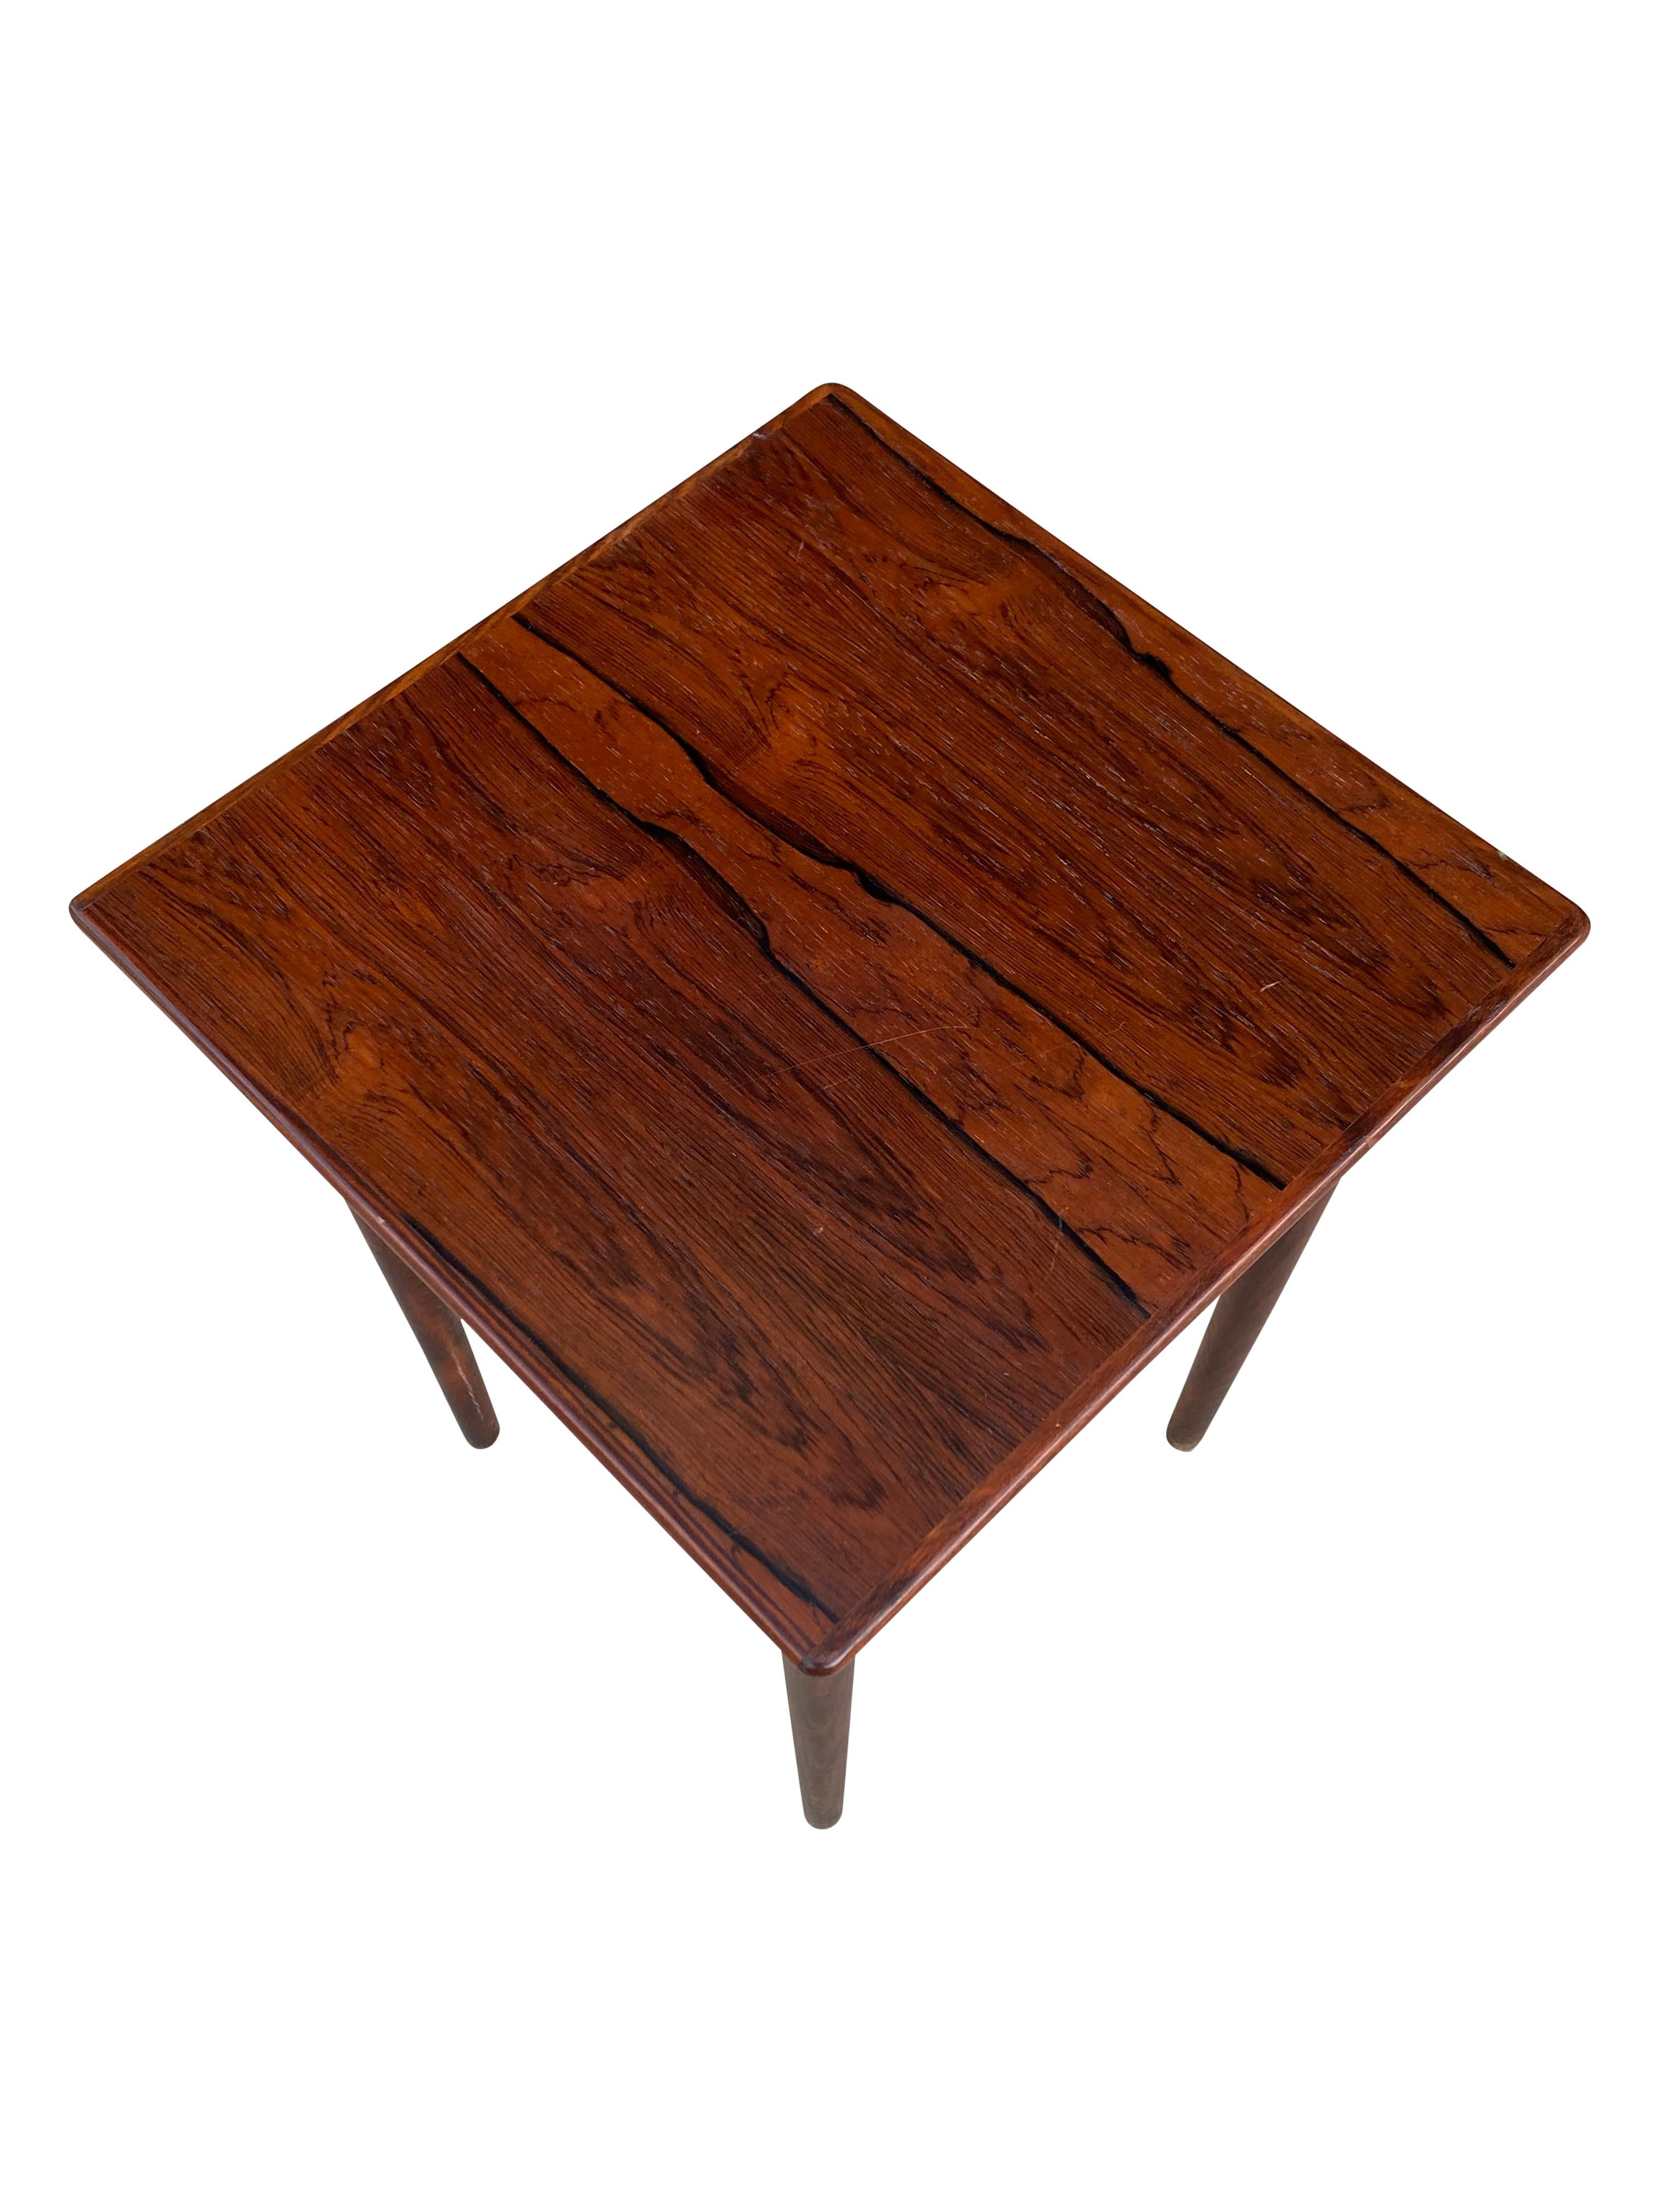 20th Century Compact Rosewood Side Table from Norway For Sale